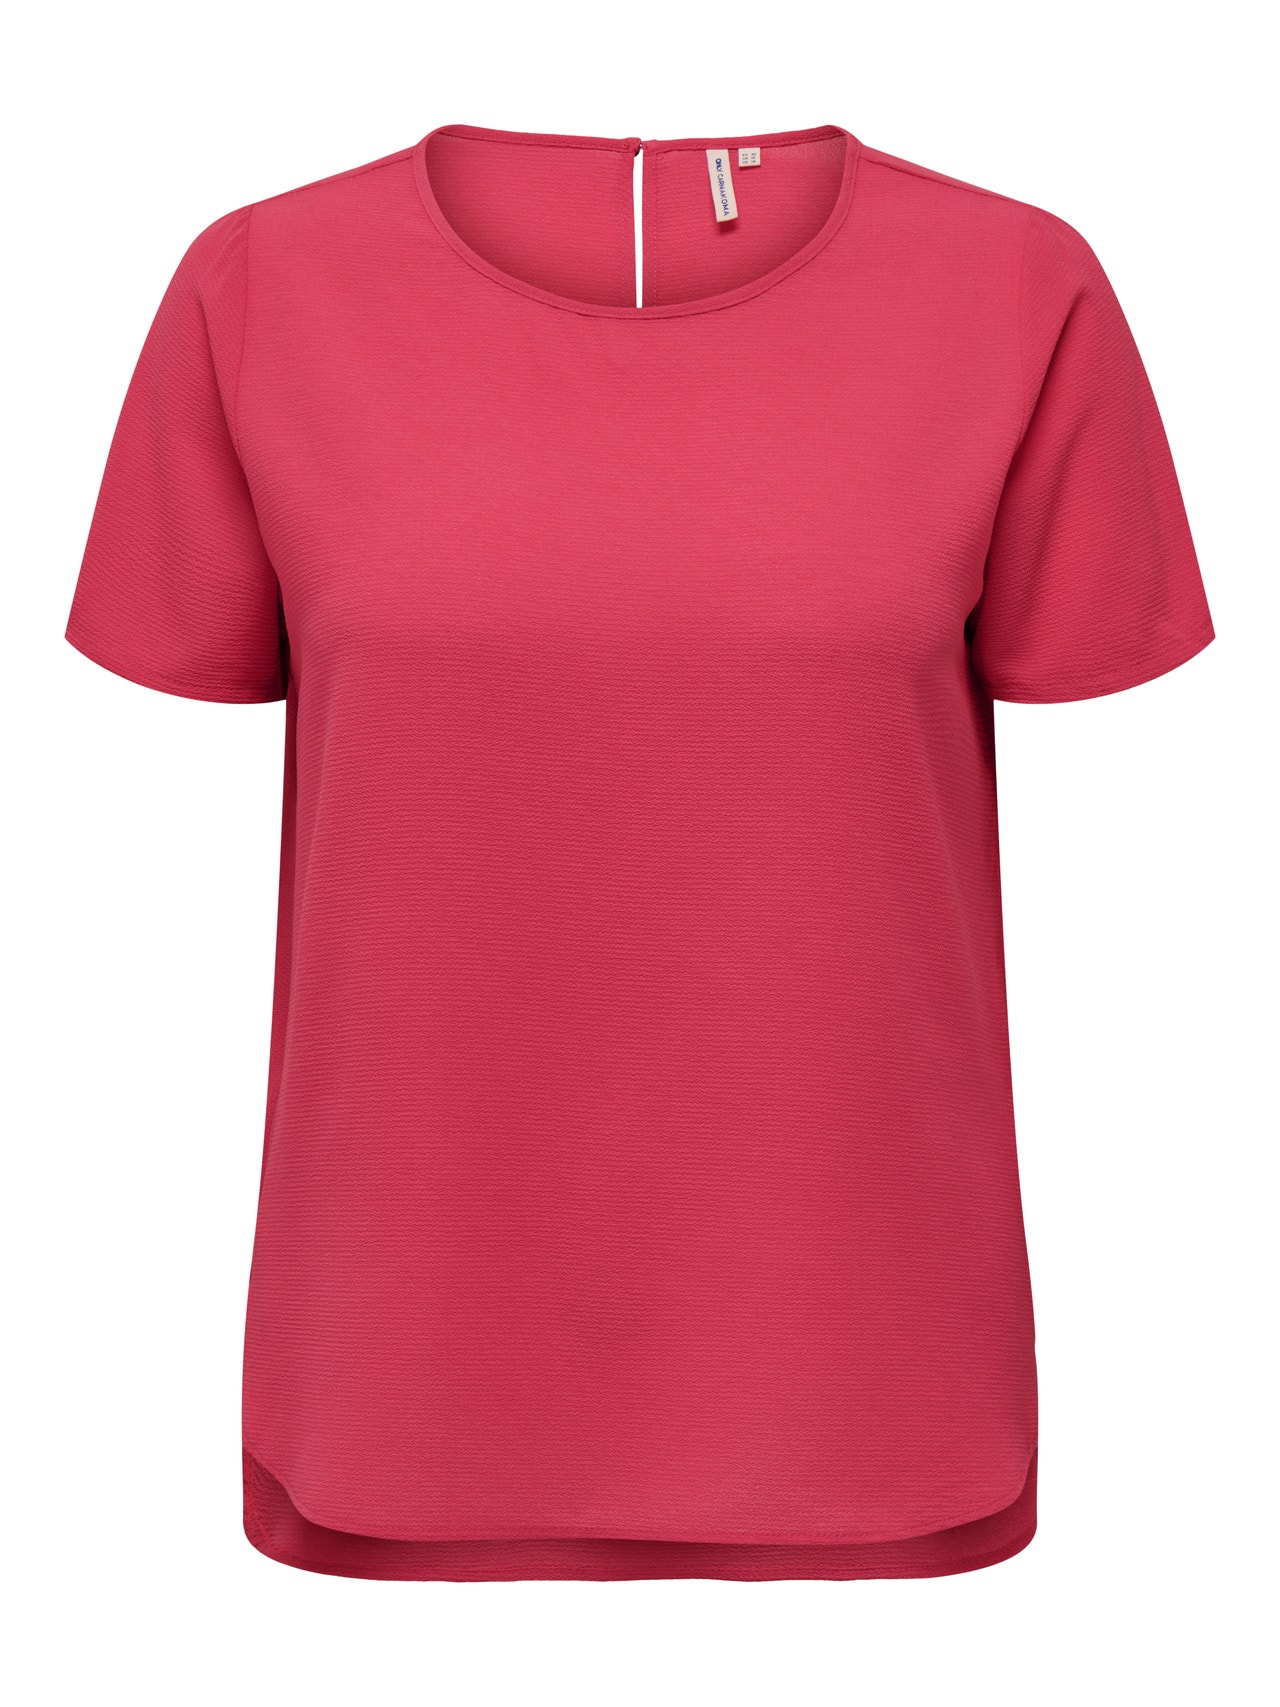 ONLY Curvy short sleeve Top -Teaberry - 15218353